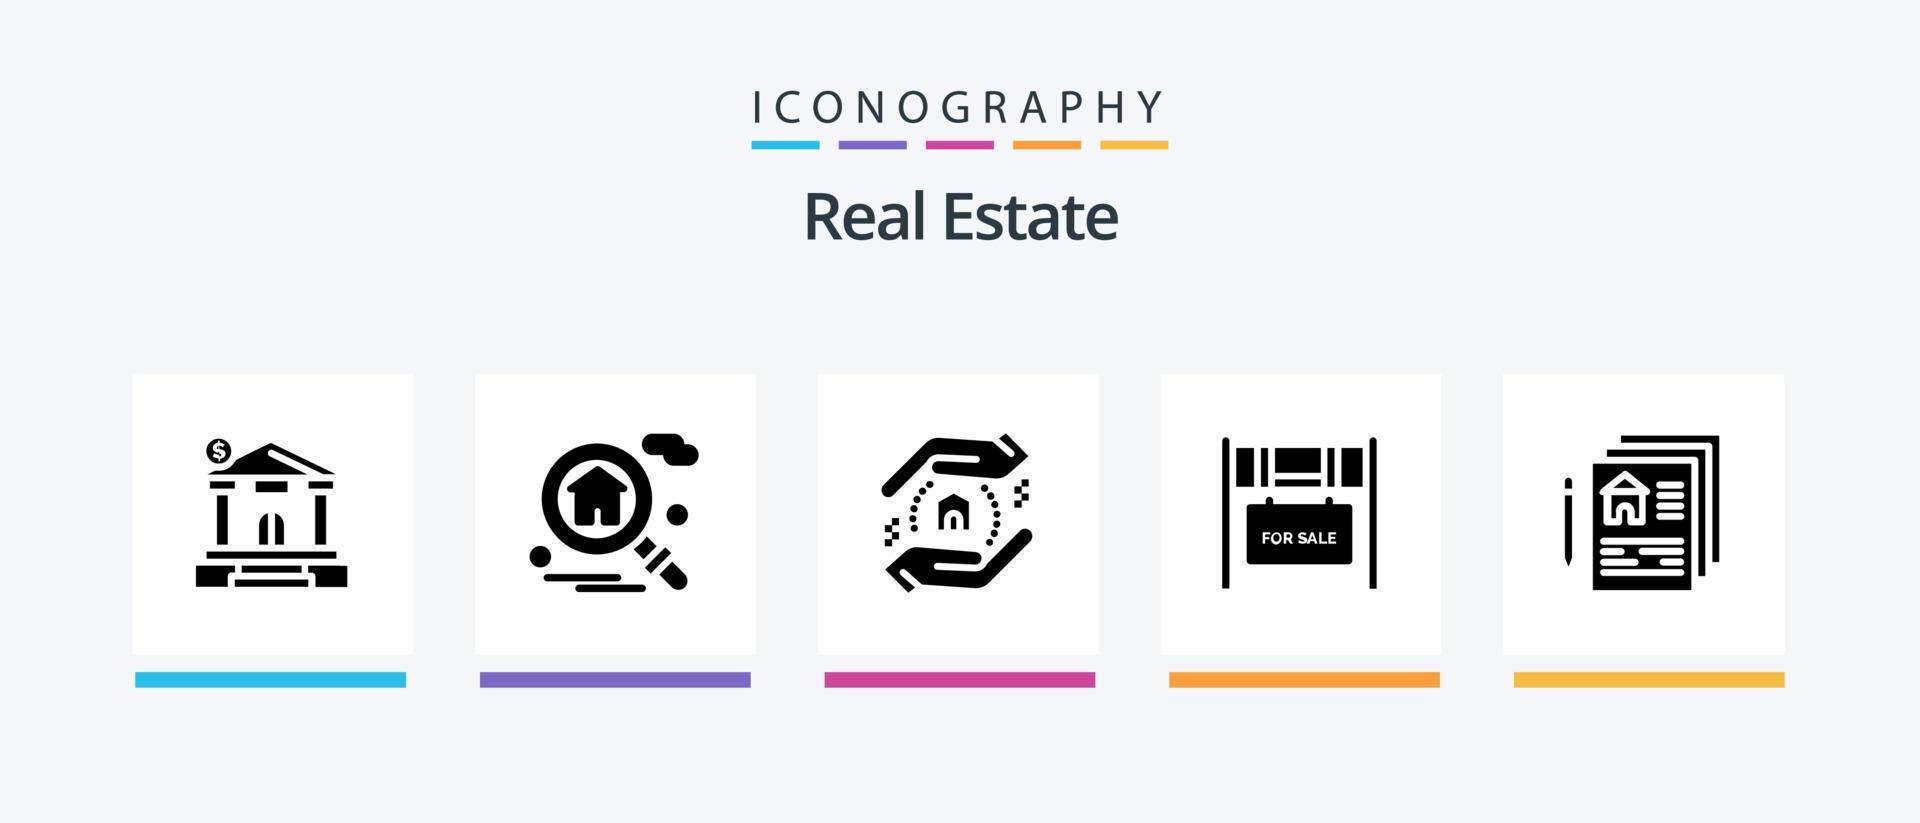 Real Estate Glyph 5 Icon Pack Including for sale. real . real estate. building . school. Creative Icons Design vector